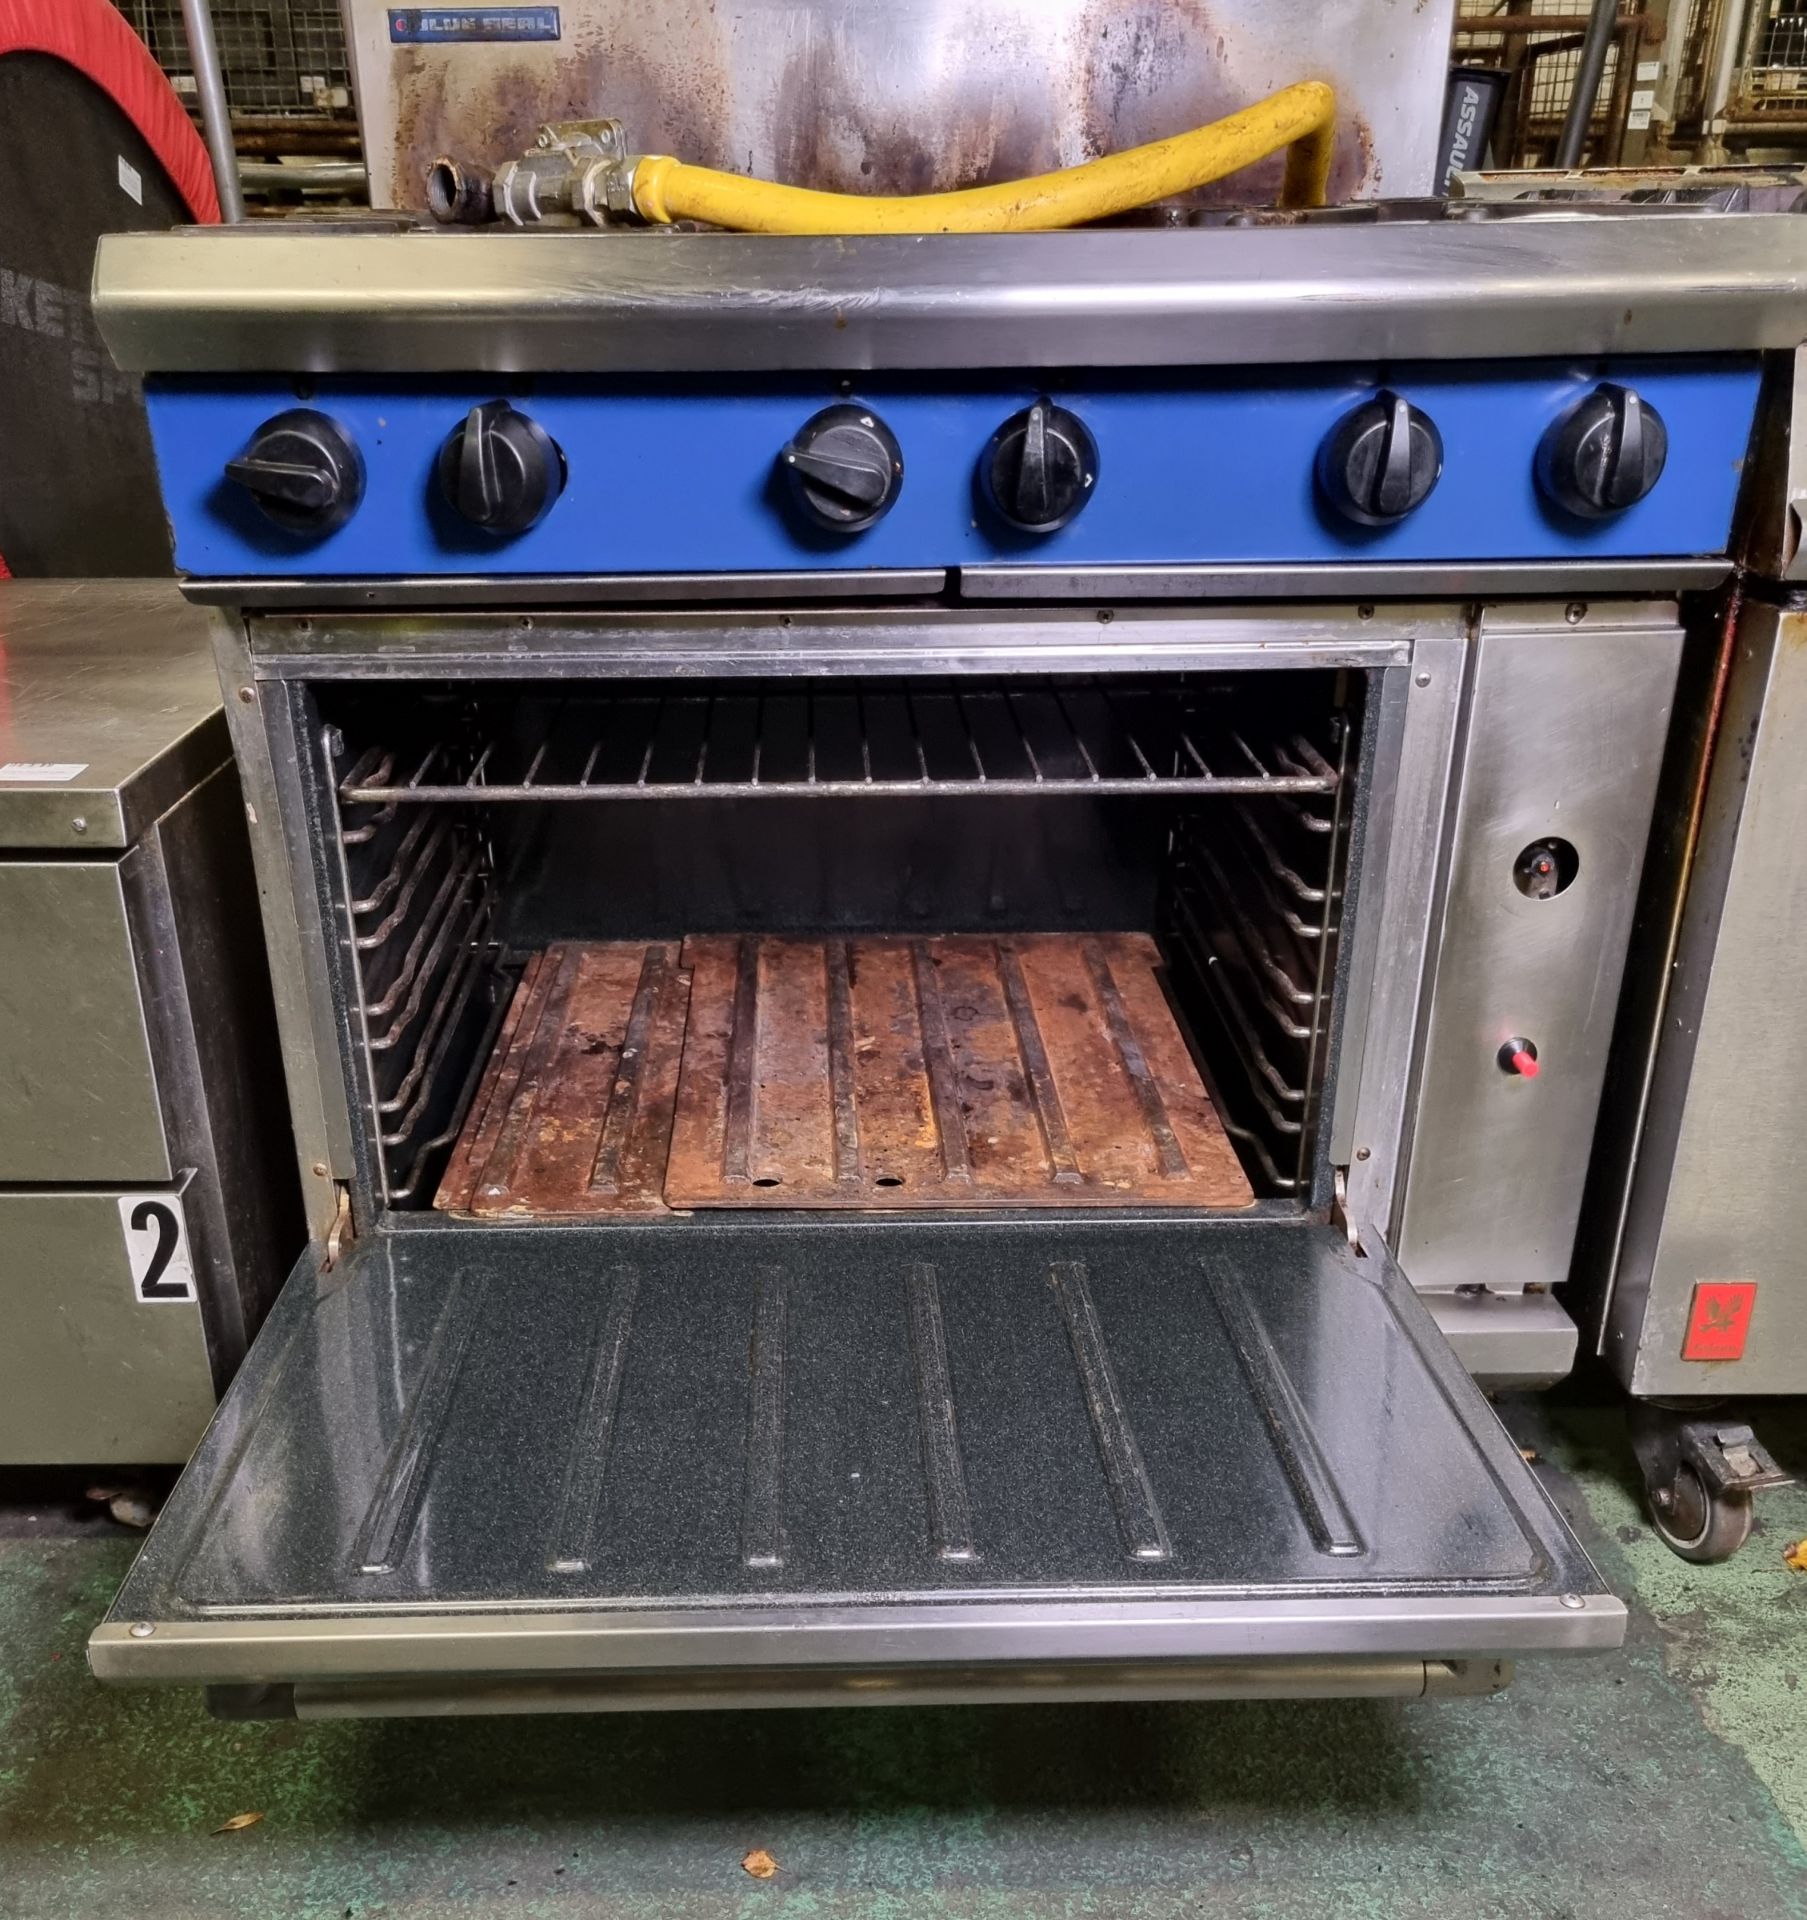 Blue Seal 6 burner gas oven - W 920 x D 850 x H 1000 mm - Image 4 of 5